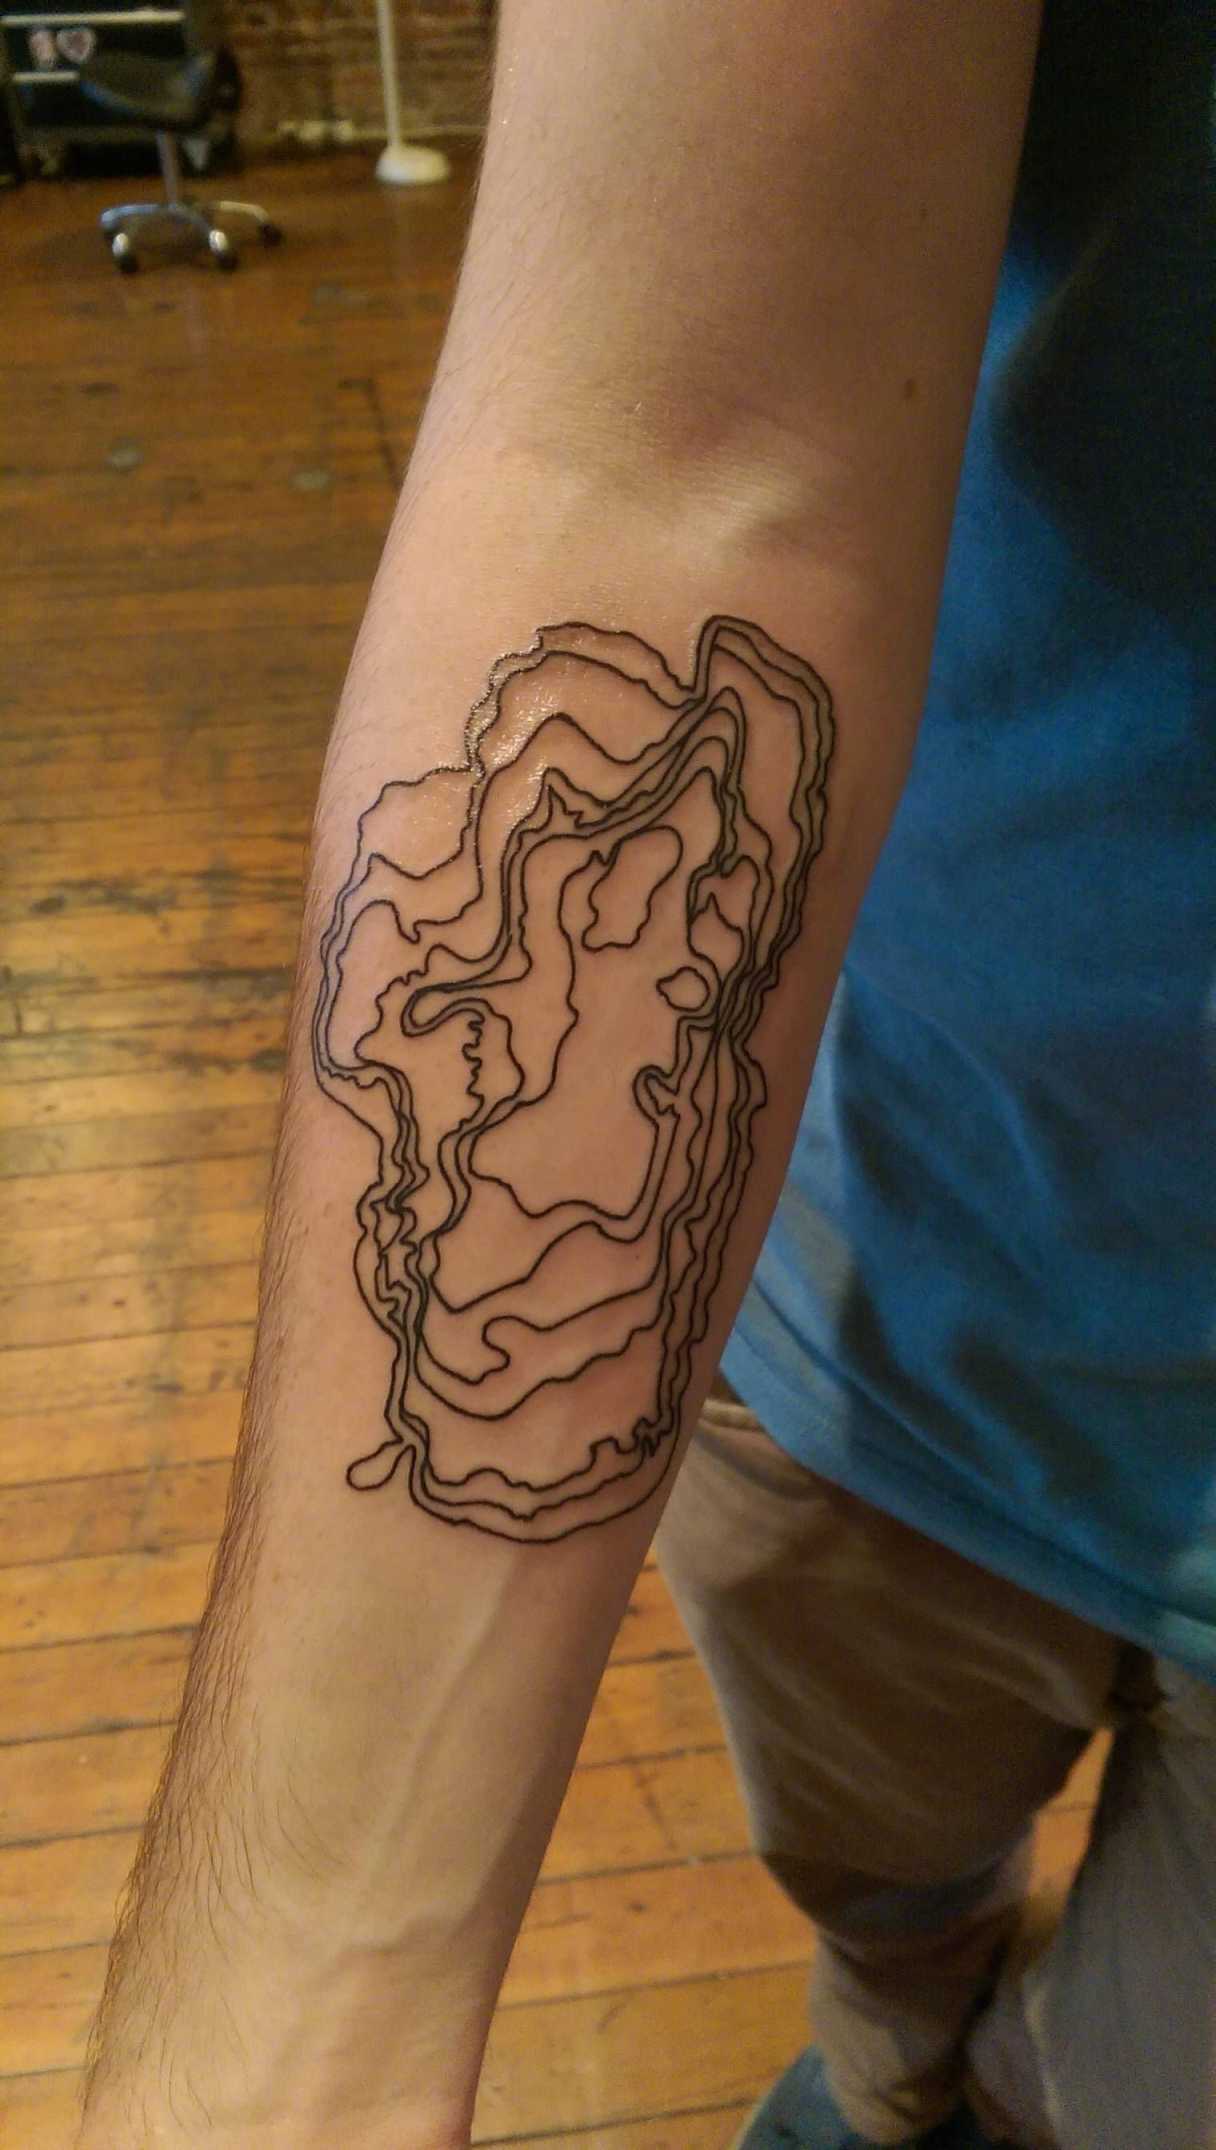 First Tattoo) topographic map of lake Tahoe by Alena Chun at Icon